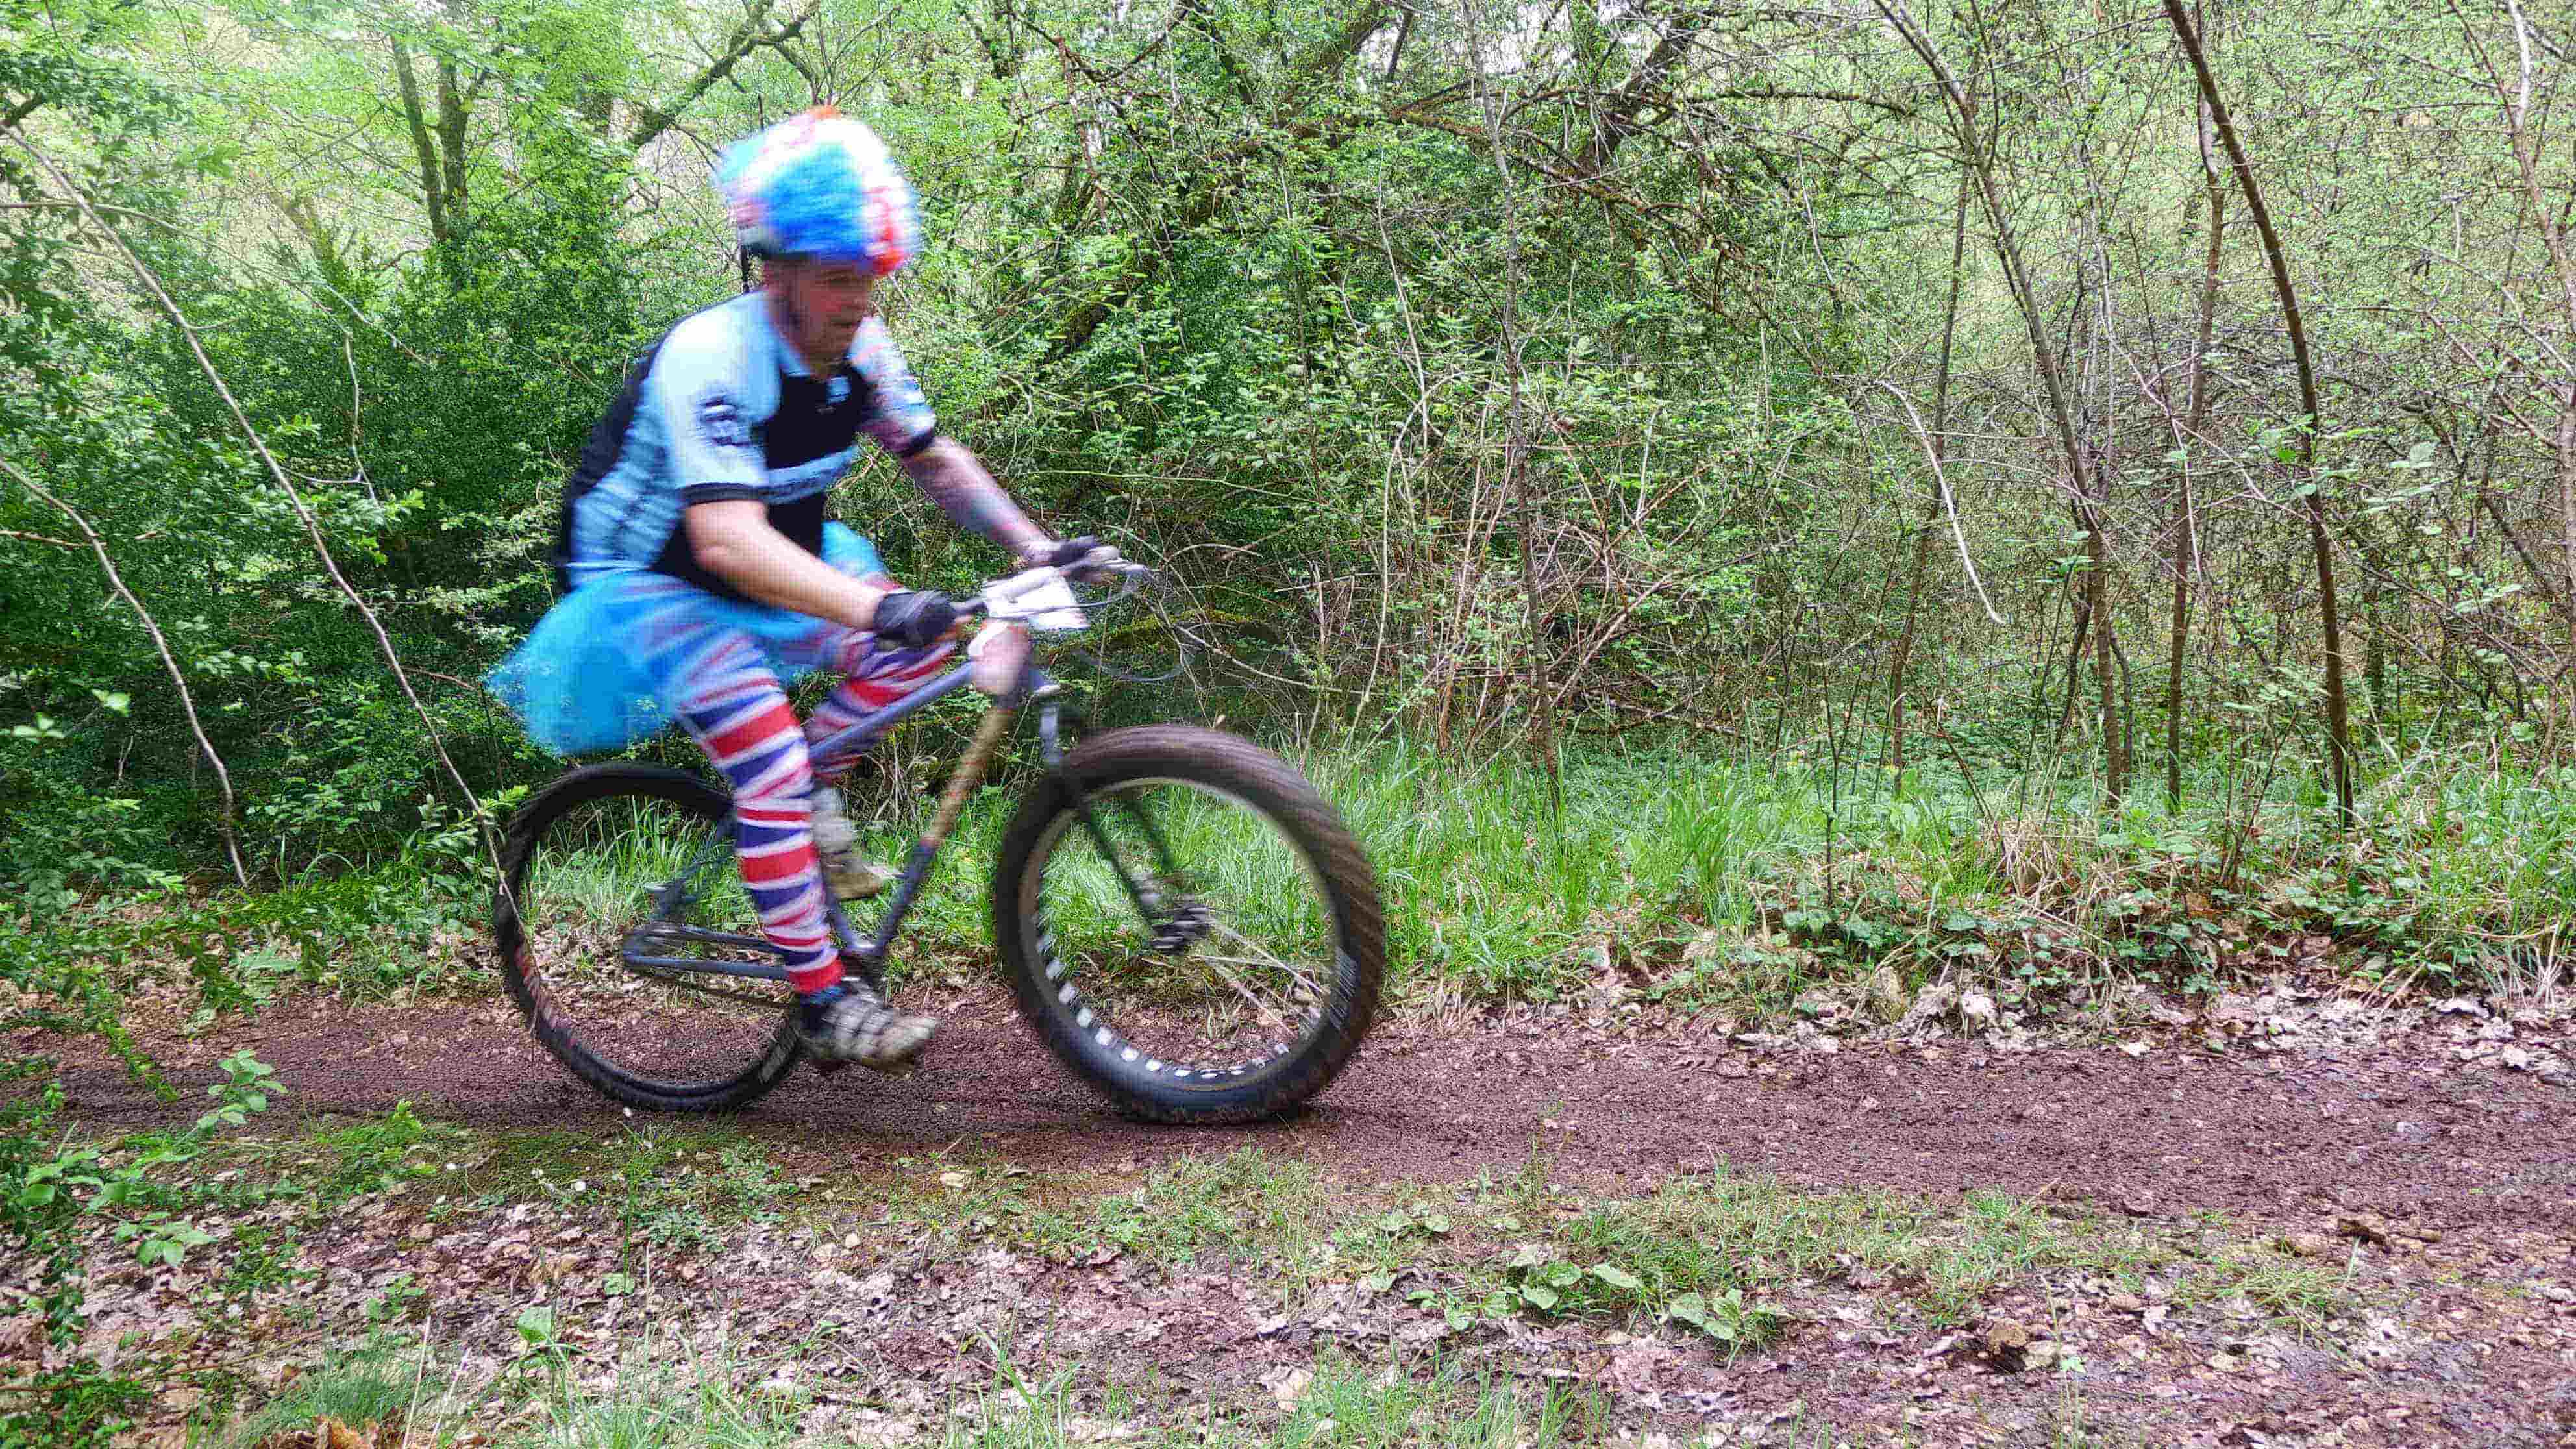 Right side view of a cyclist, wearing a colorful costume, riding a fat bike on a dirt trail in the woods